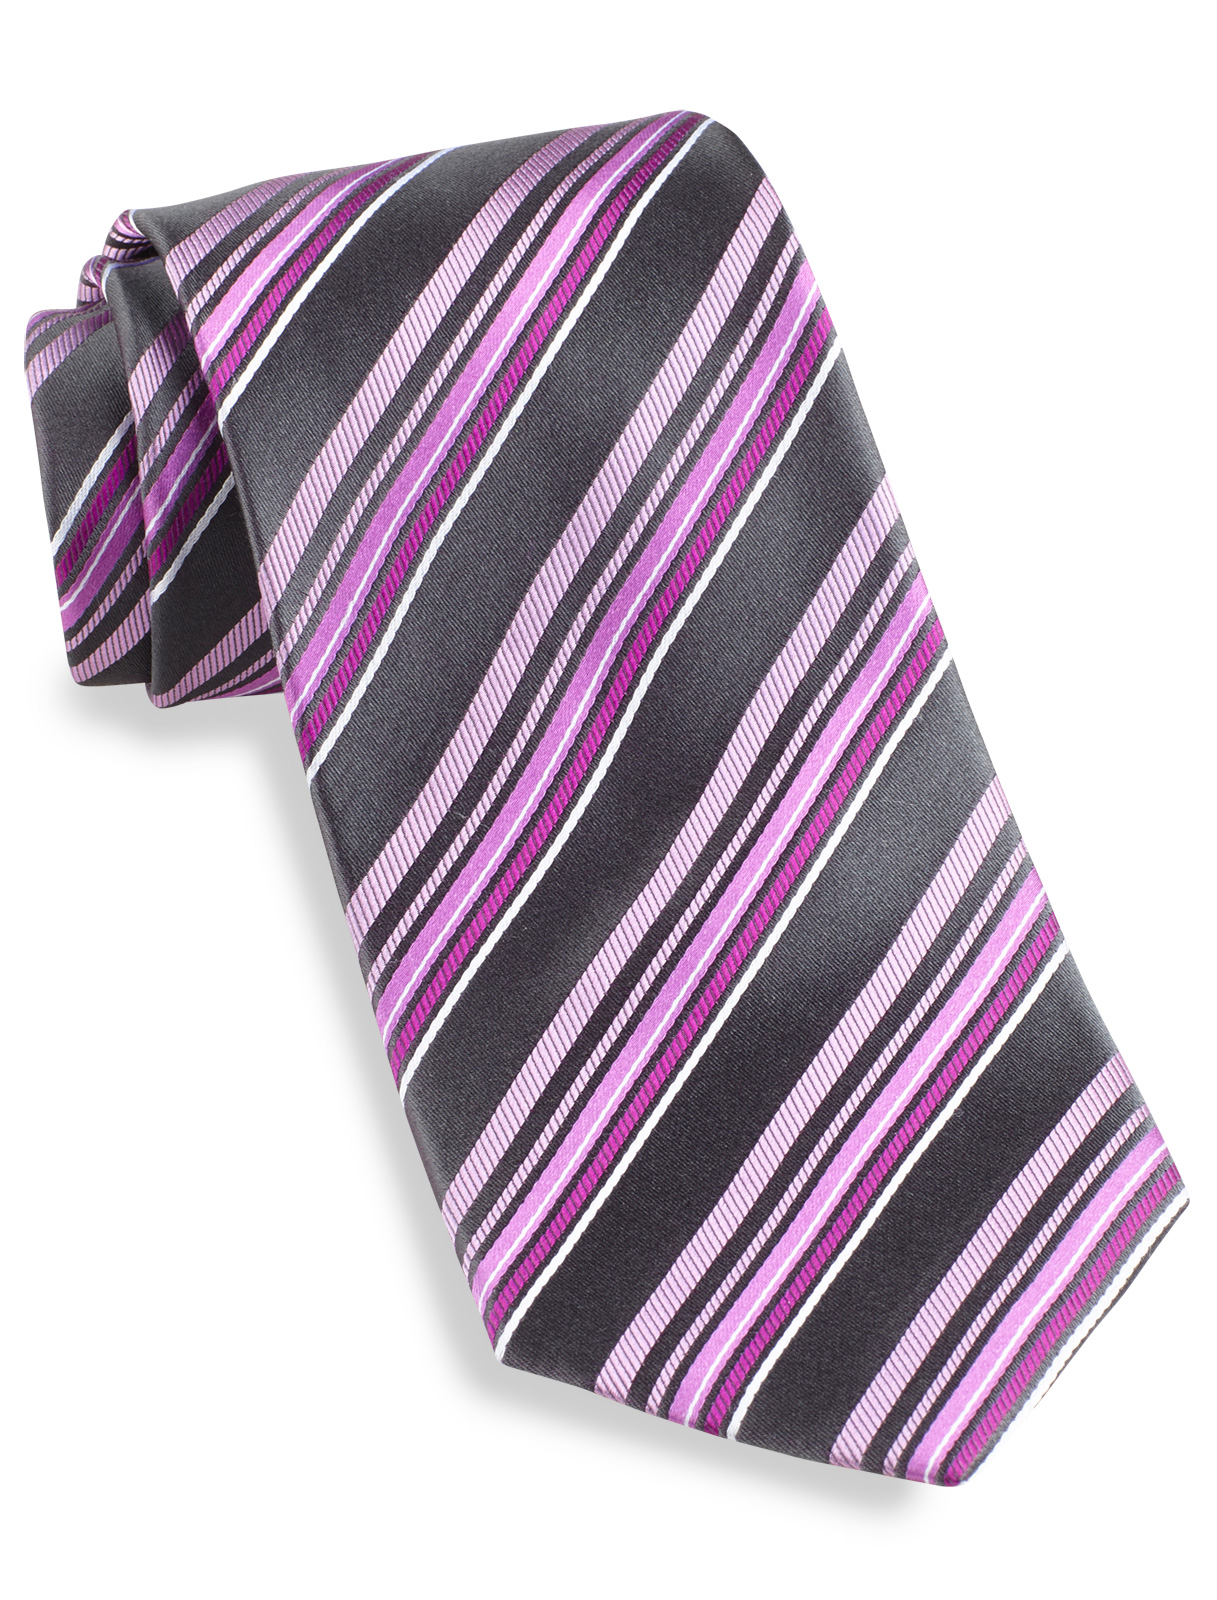 Synrgy Men's Big and Tall Multi Stripe Silk Tie